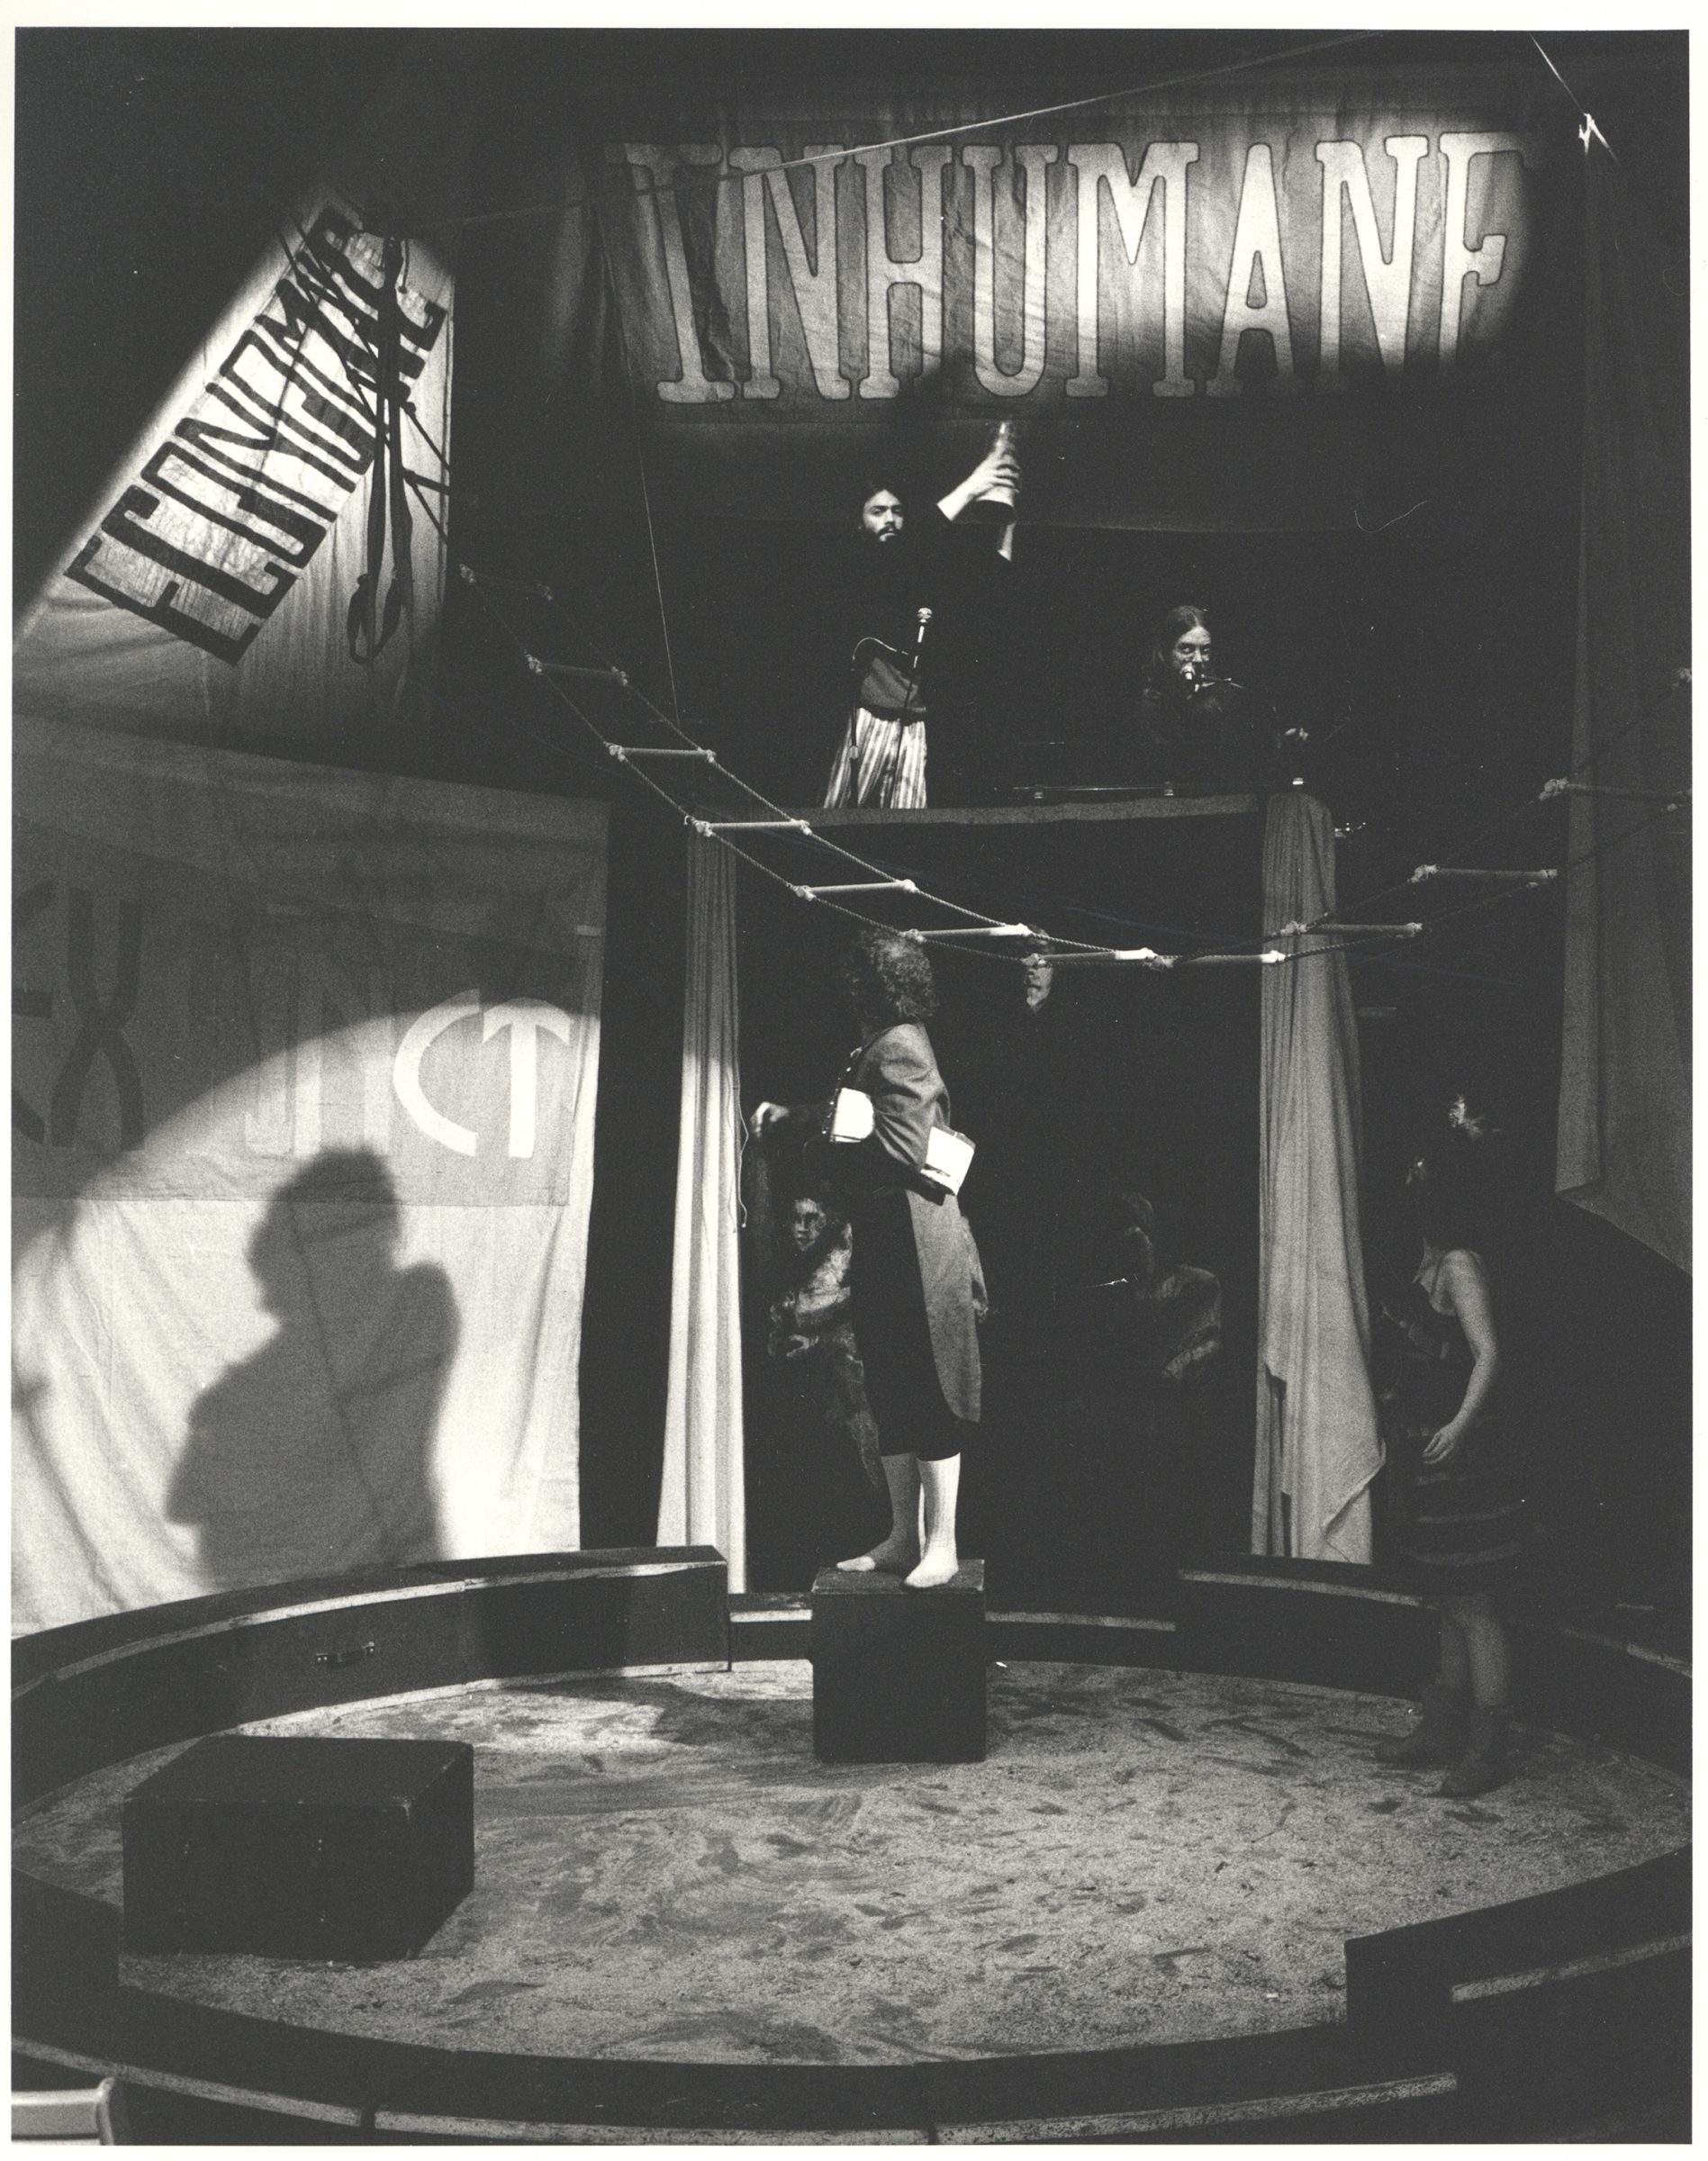 A black and white photo of a circus ring. A person stands on a box looking up above them. They're wearing a long jacket. A person on stands to the right wearing a dress, also looking up. Two people are on a platform above them.